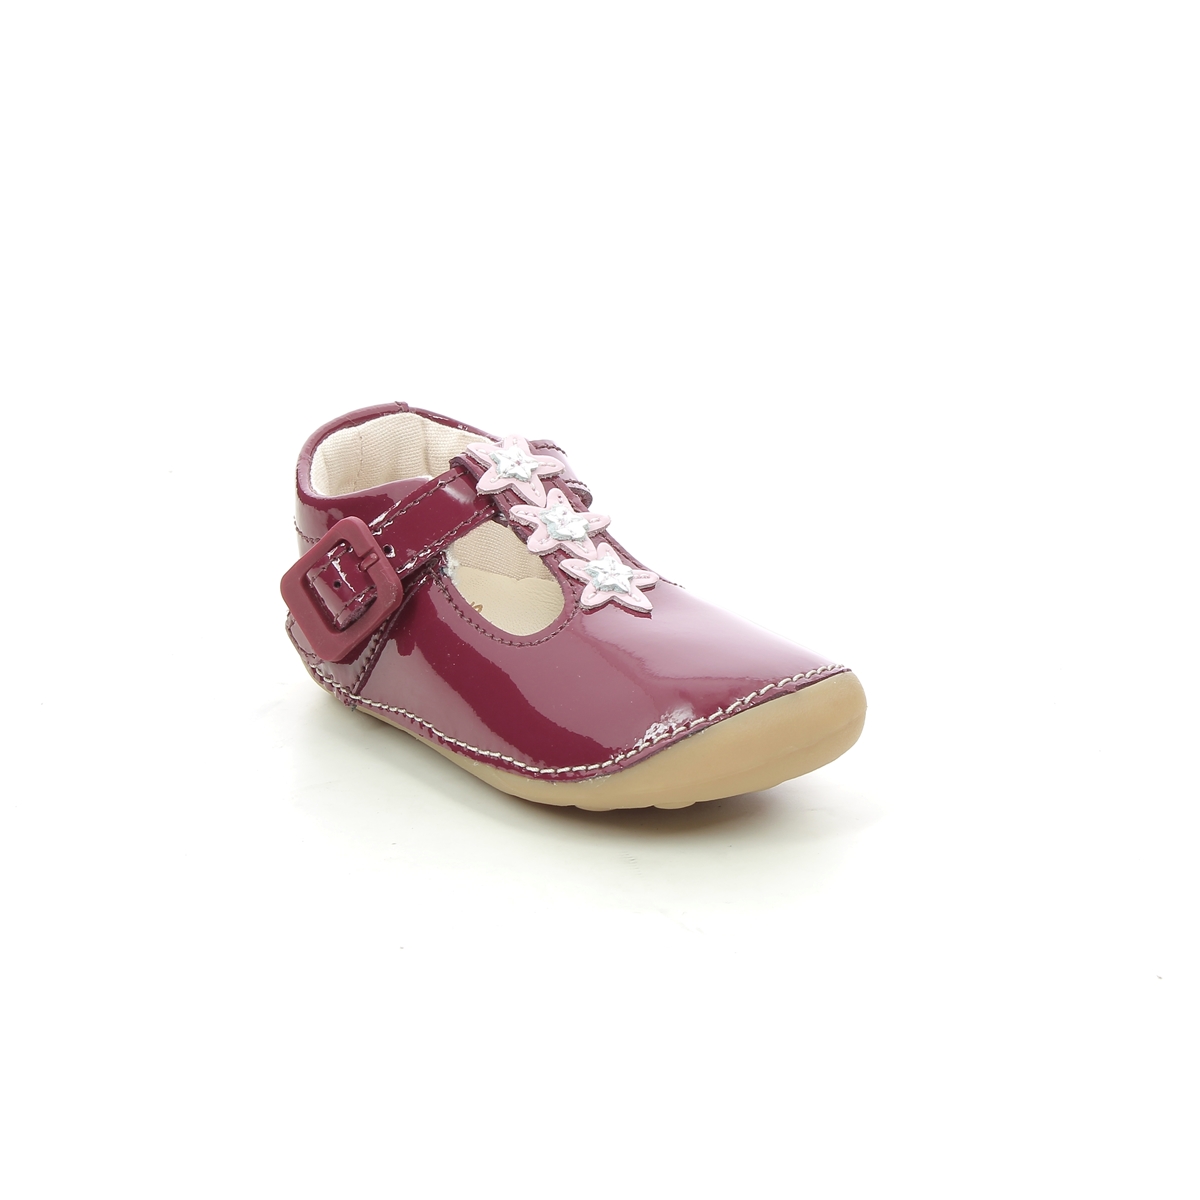 Clarks Tiny Flower T Red patent Kids girls first and baby shoes 6245-87G in a Plain Leather in Size 4